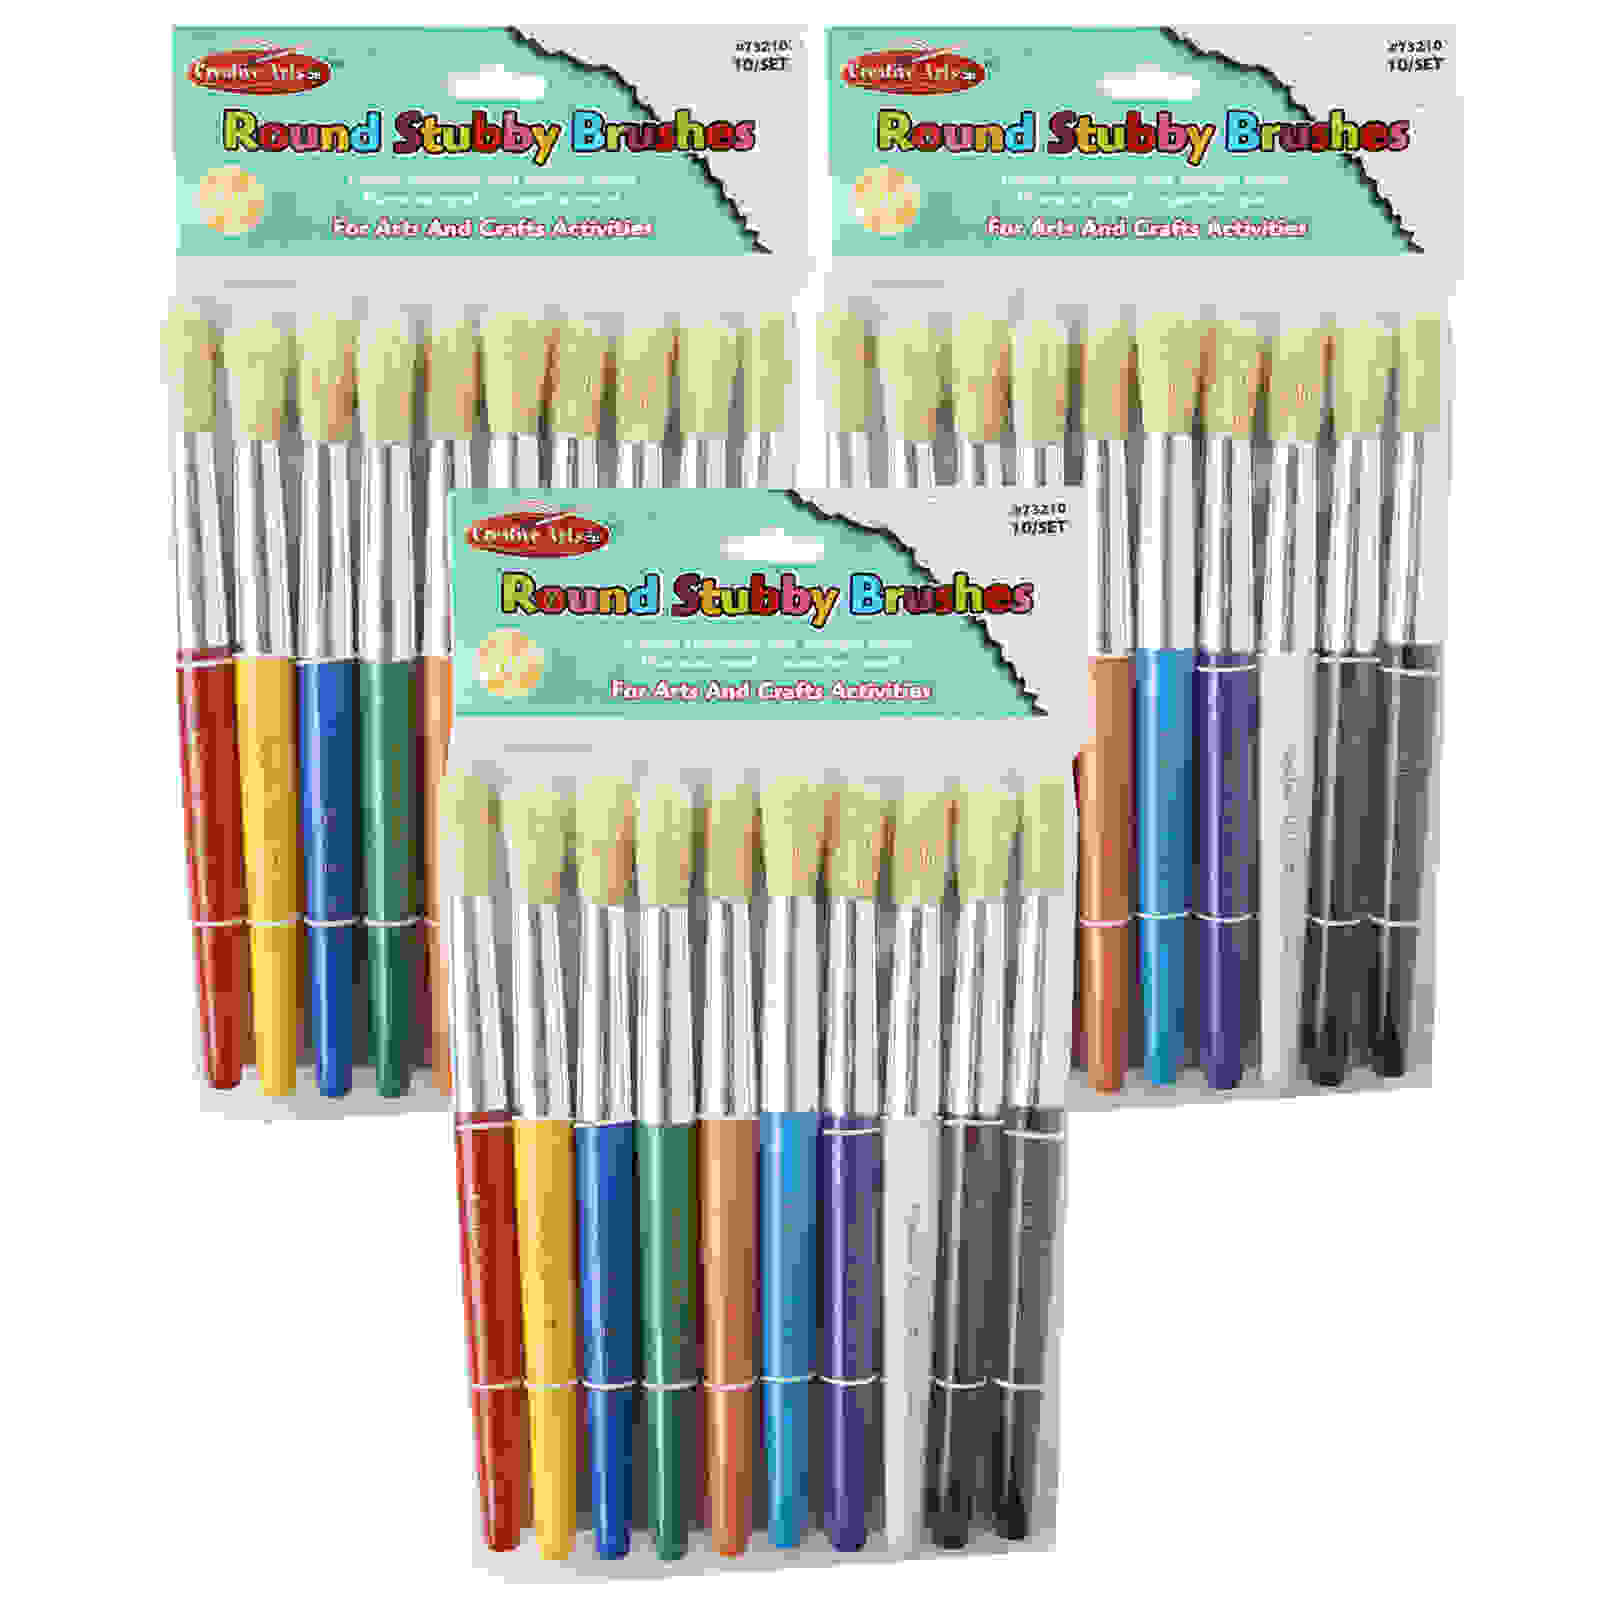 Creative Arts Stubby Round Brushes, Assorted Colors, 10 Per Pack, 3 Packs